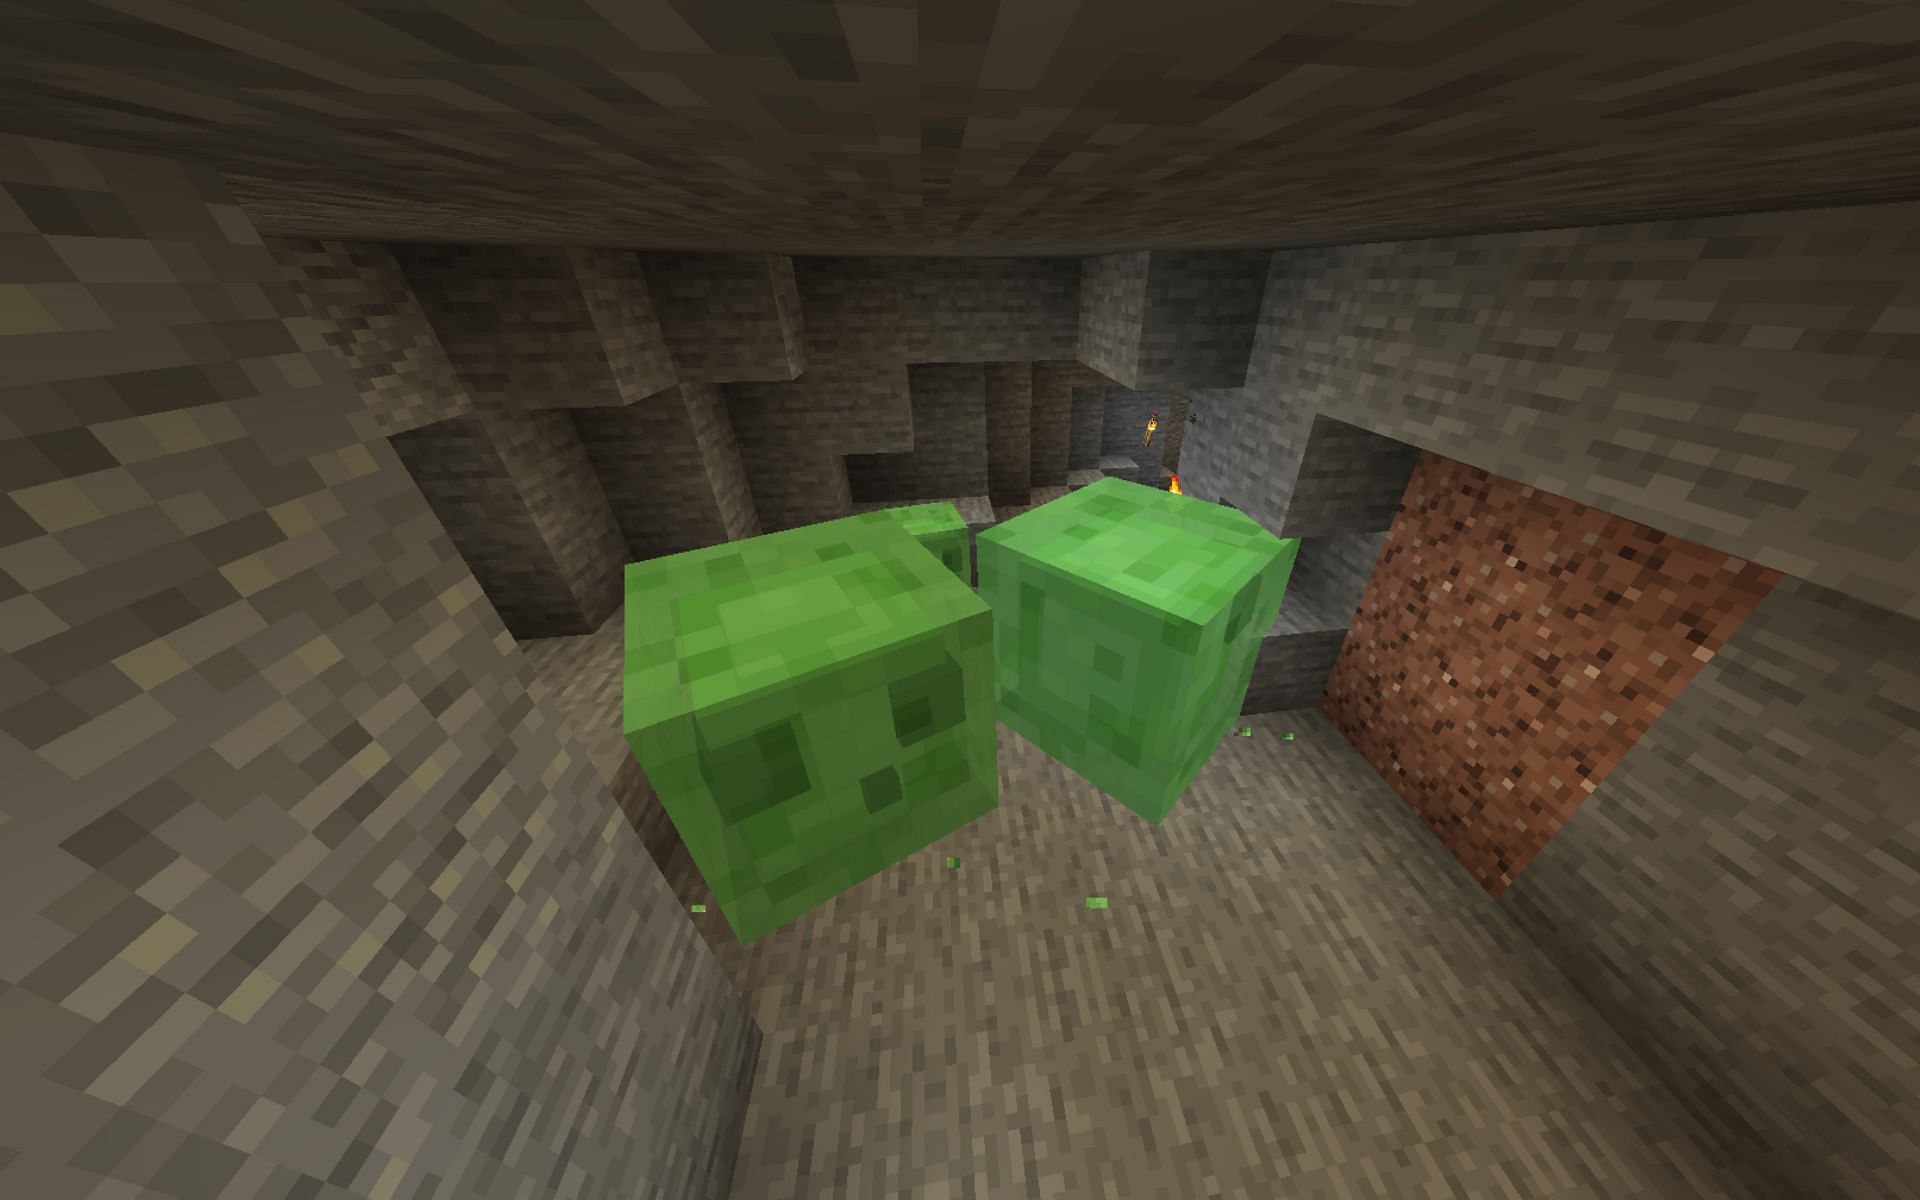 Minecraft: how to find Slimes and make a Slime Farm